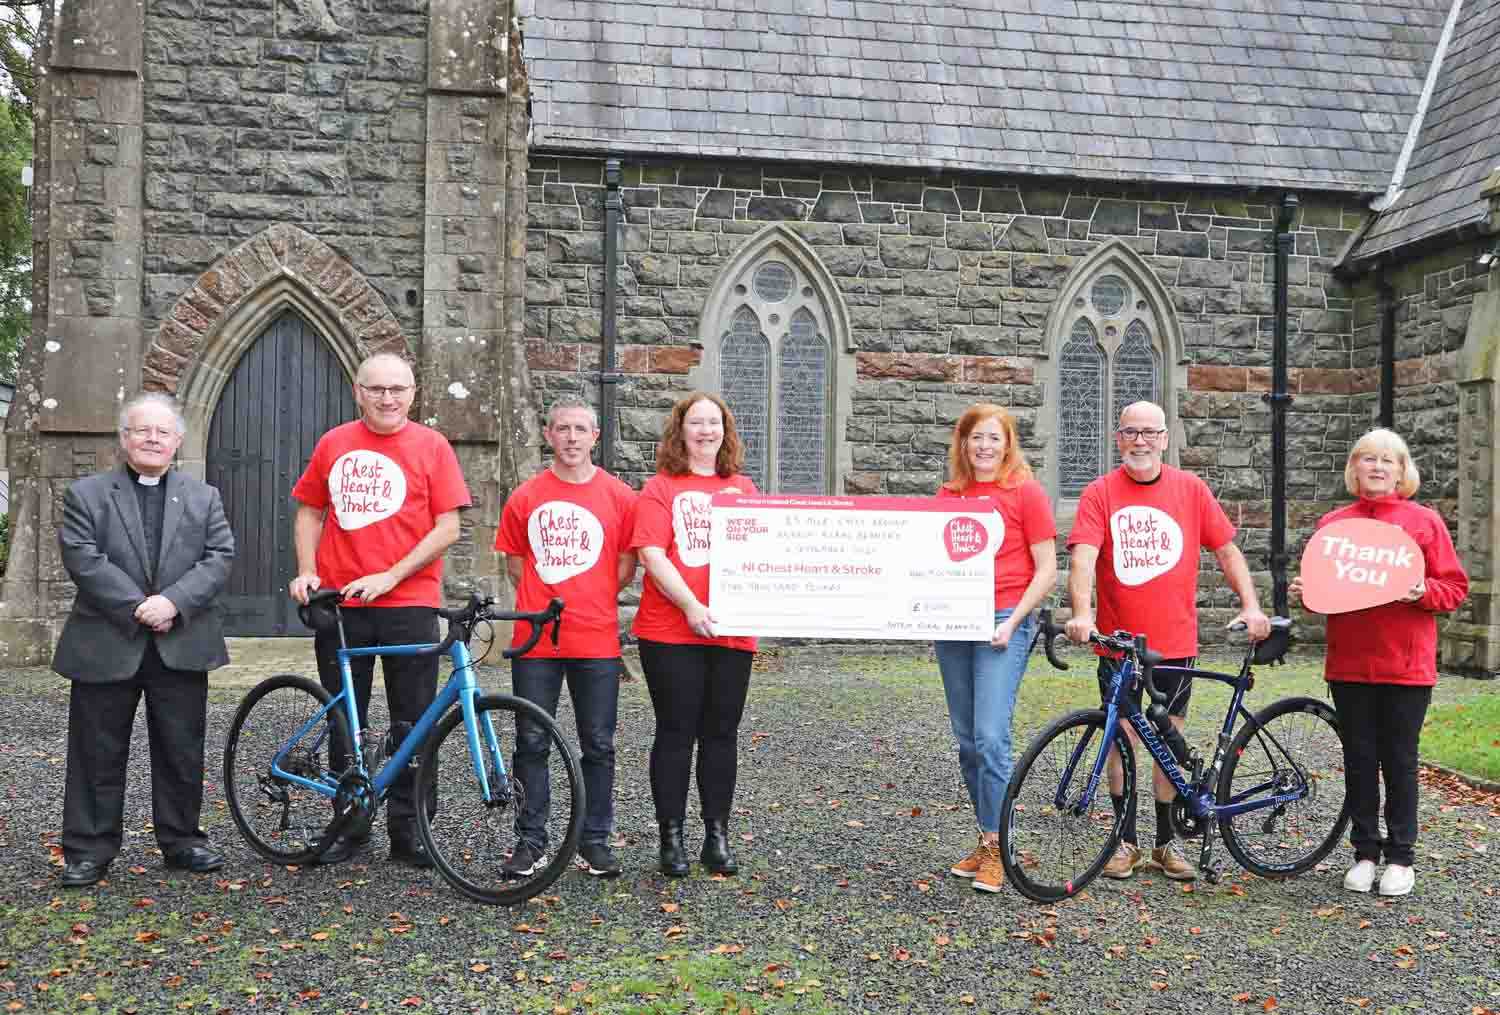 At the presentation of funds raised by the Antrim Rural Deanery sponsored cycle are, from left: The Rev Canon David Humphries (rector of Kilbride Parish), David Holmes (Kilbride), Simon Wells, Yvey Wells and Lisa Holmes (all Christ Church, Ballynure), Peter Gates (All Saints', Antrim) and Valerie Saunders from NI Chest, Heart and Stroke.